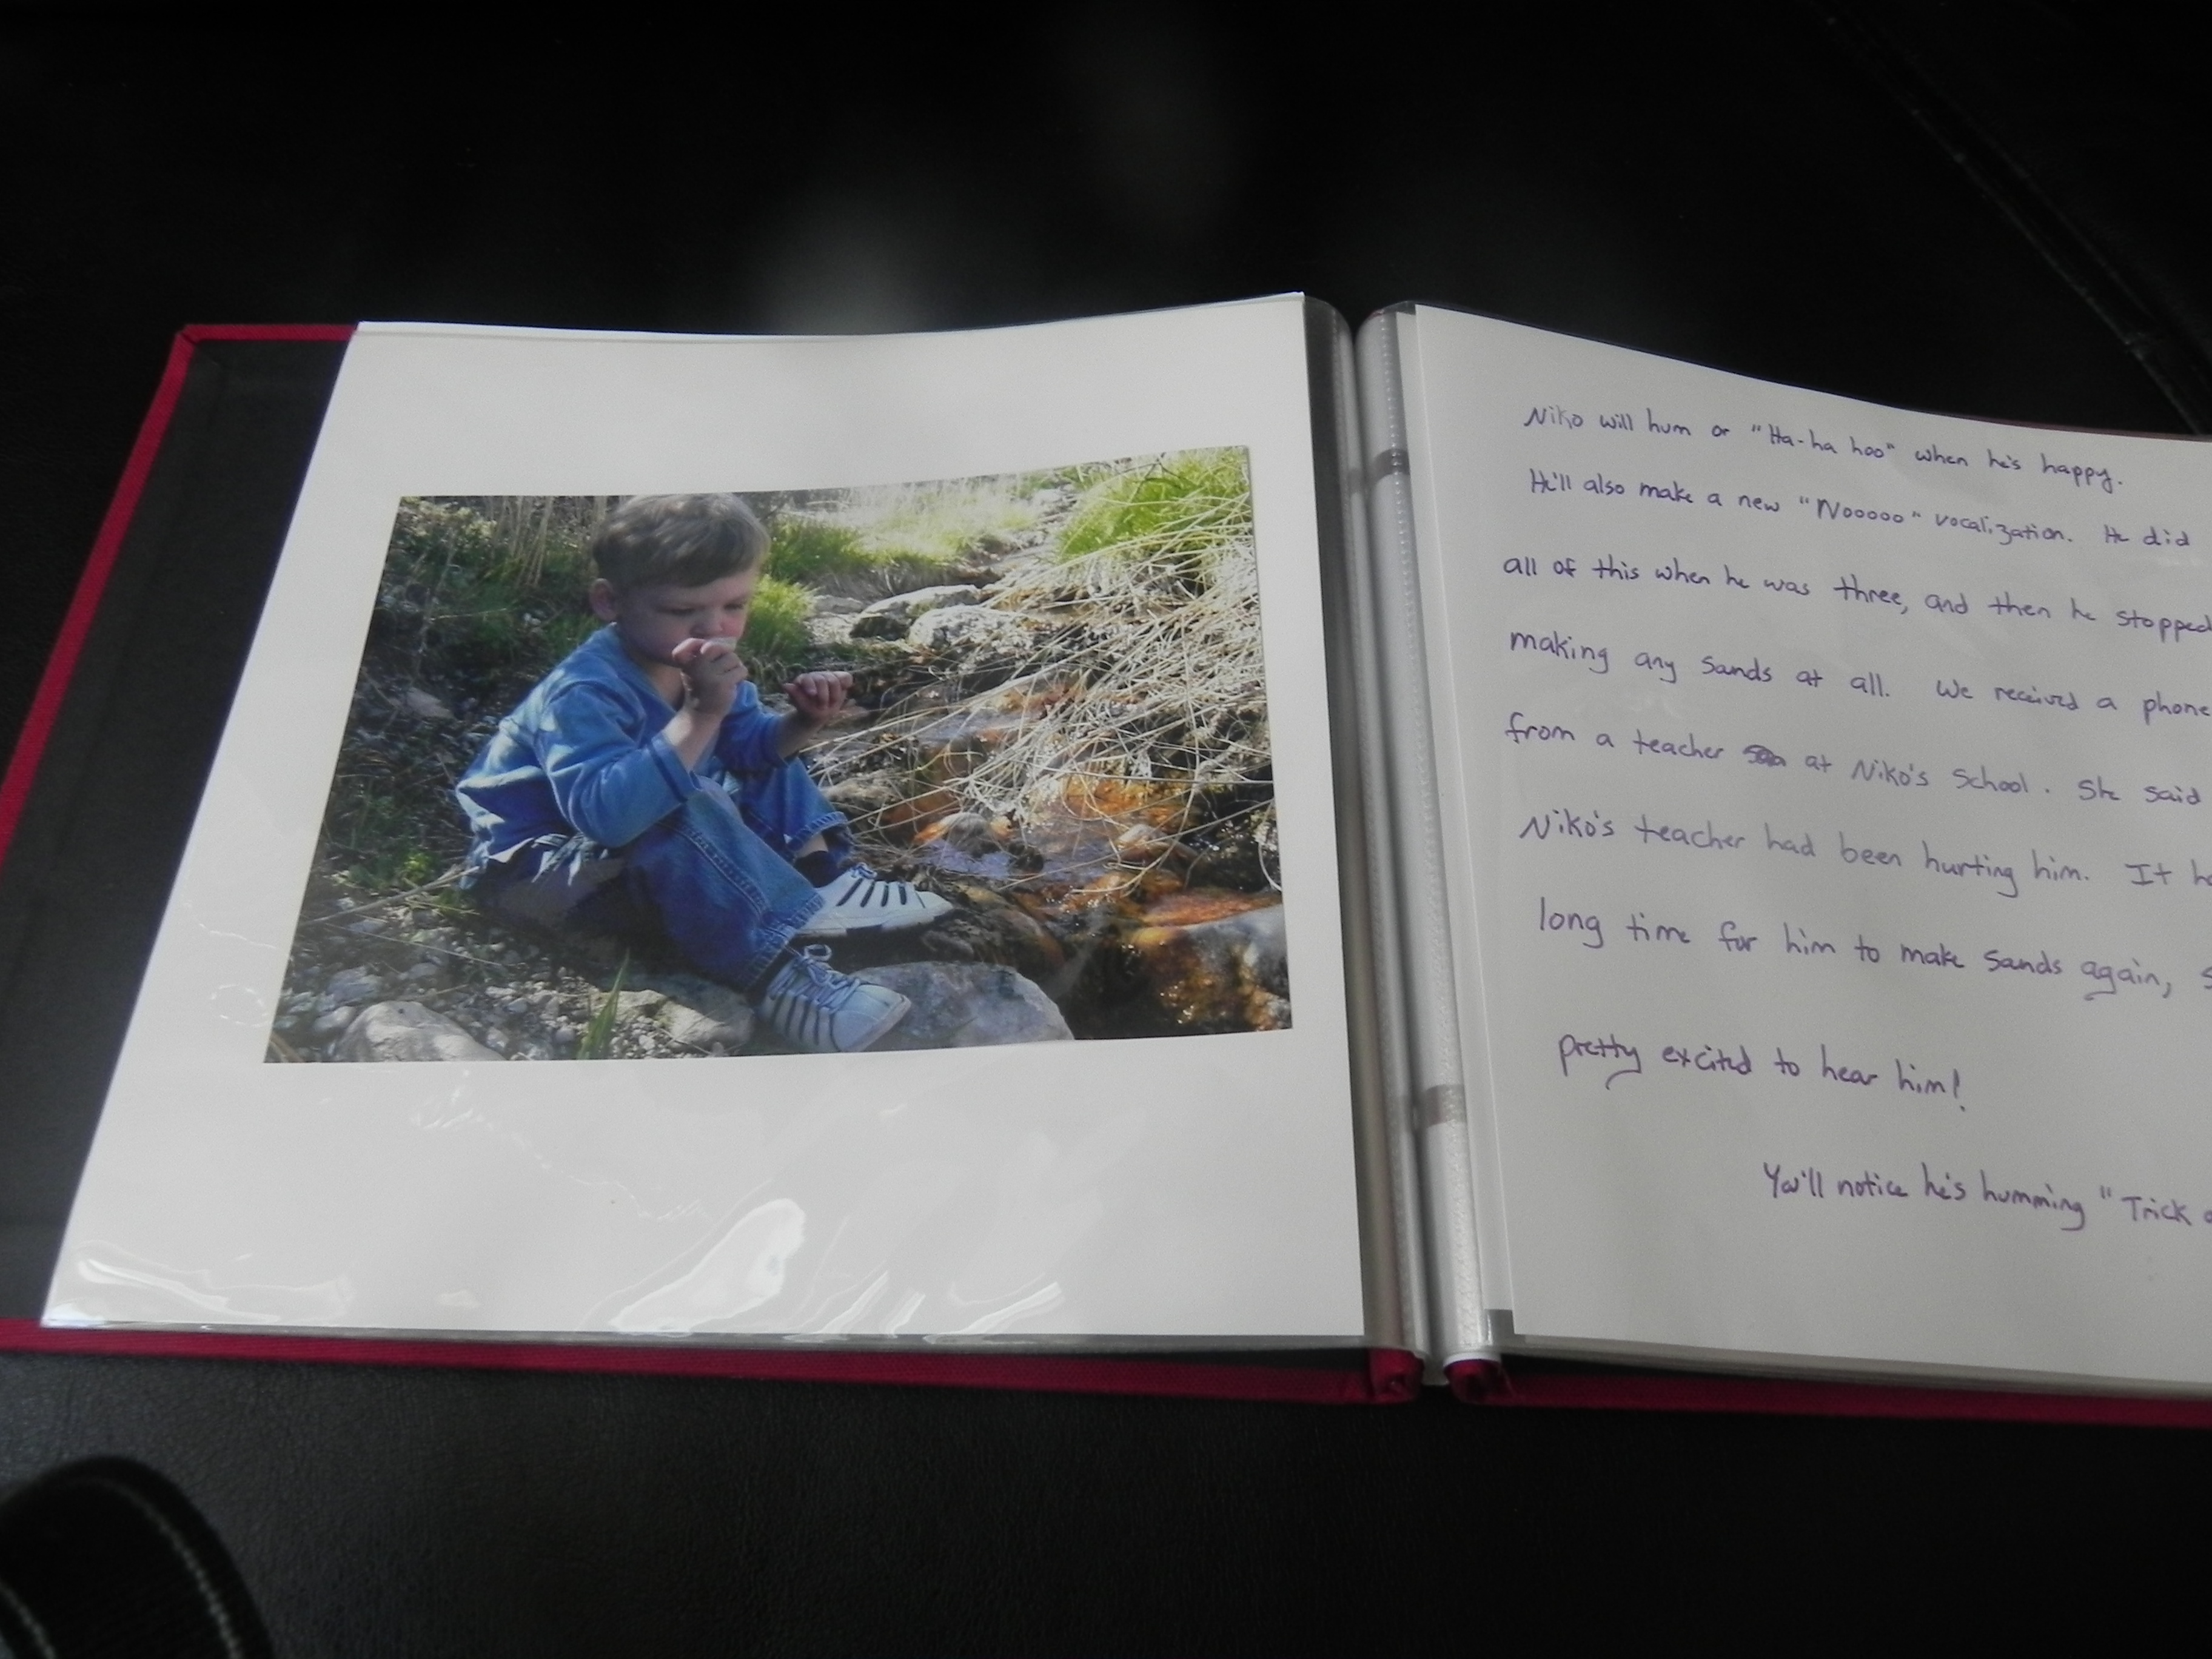 An example of a scrapbook.